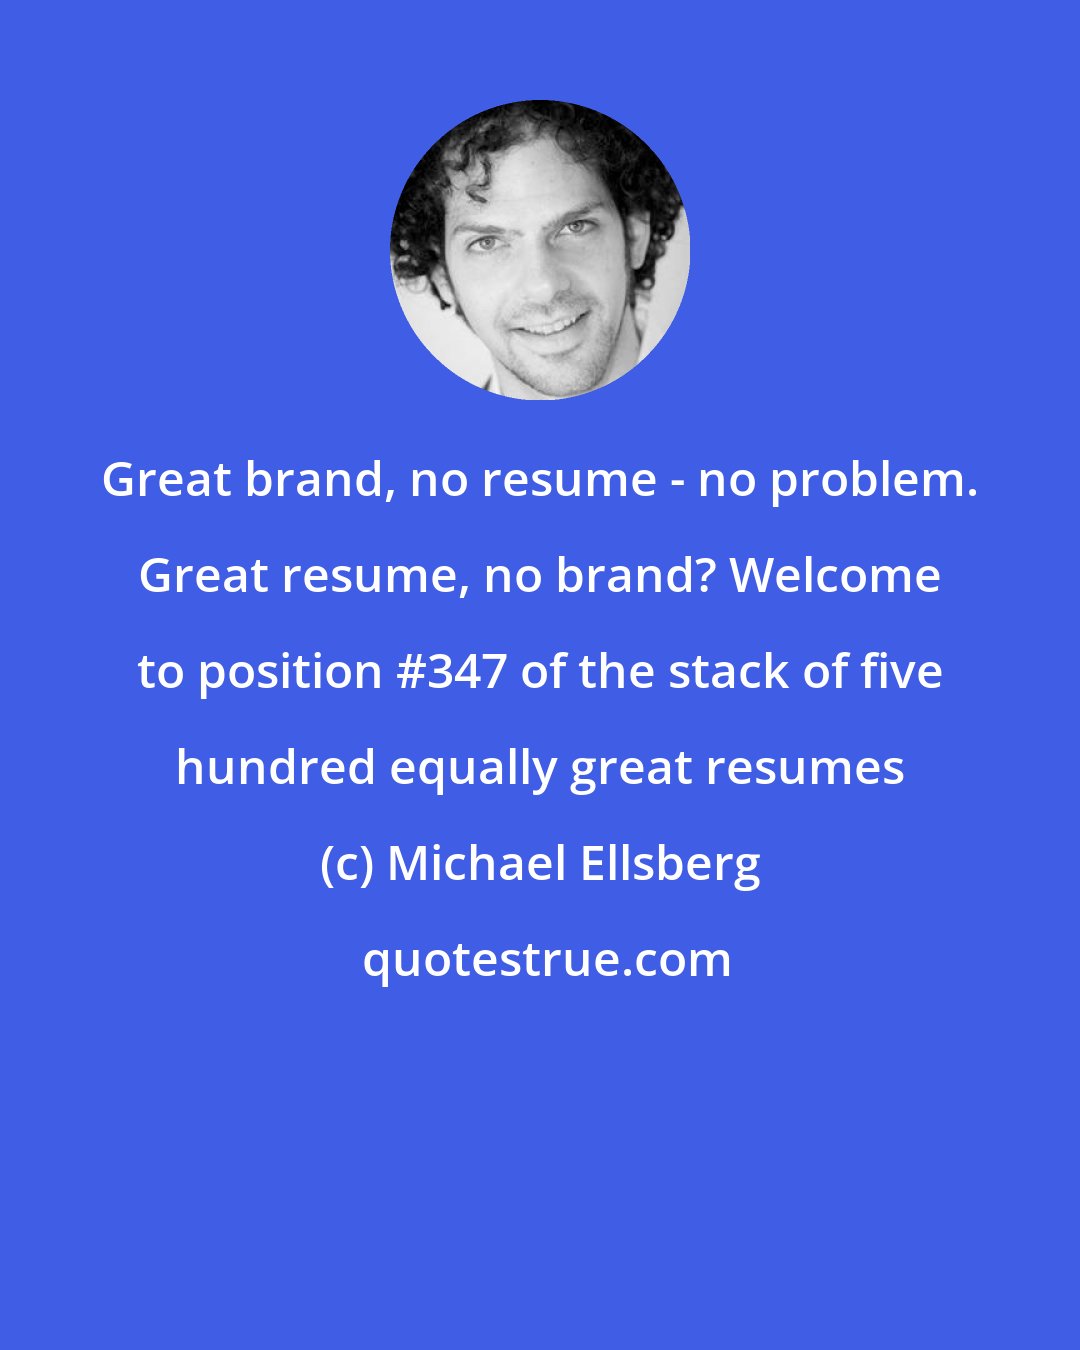 Michael Ellsberg: Great brand, no resume - no problem. Great resume, no brand? Welcome to position #347 of the stack of five hundred equally great resumes